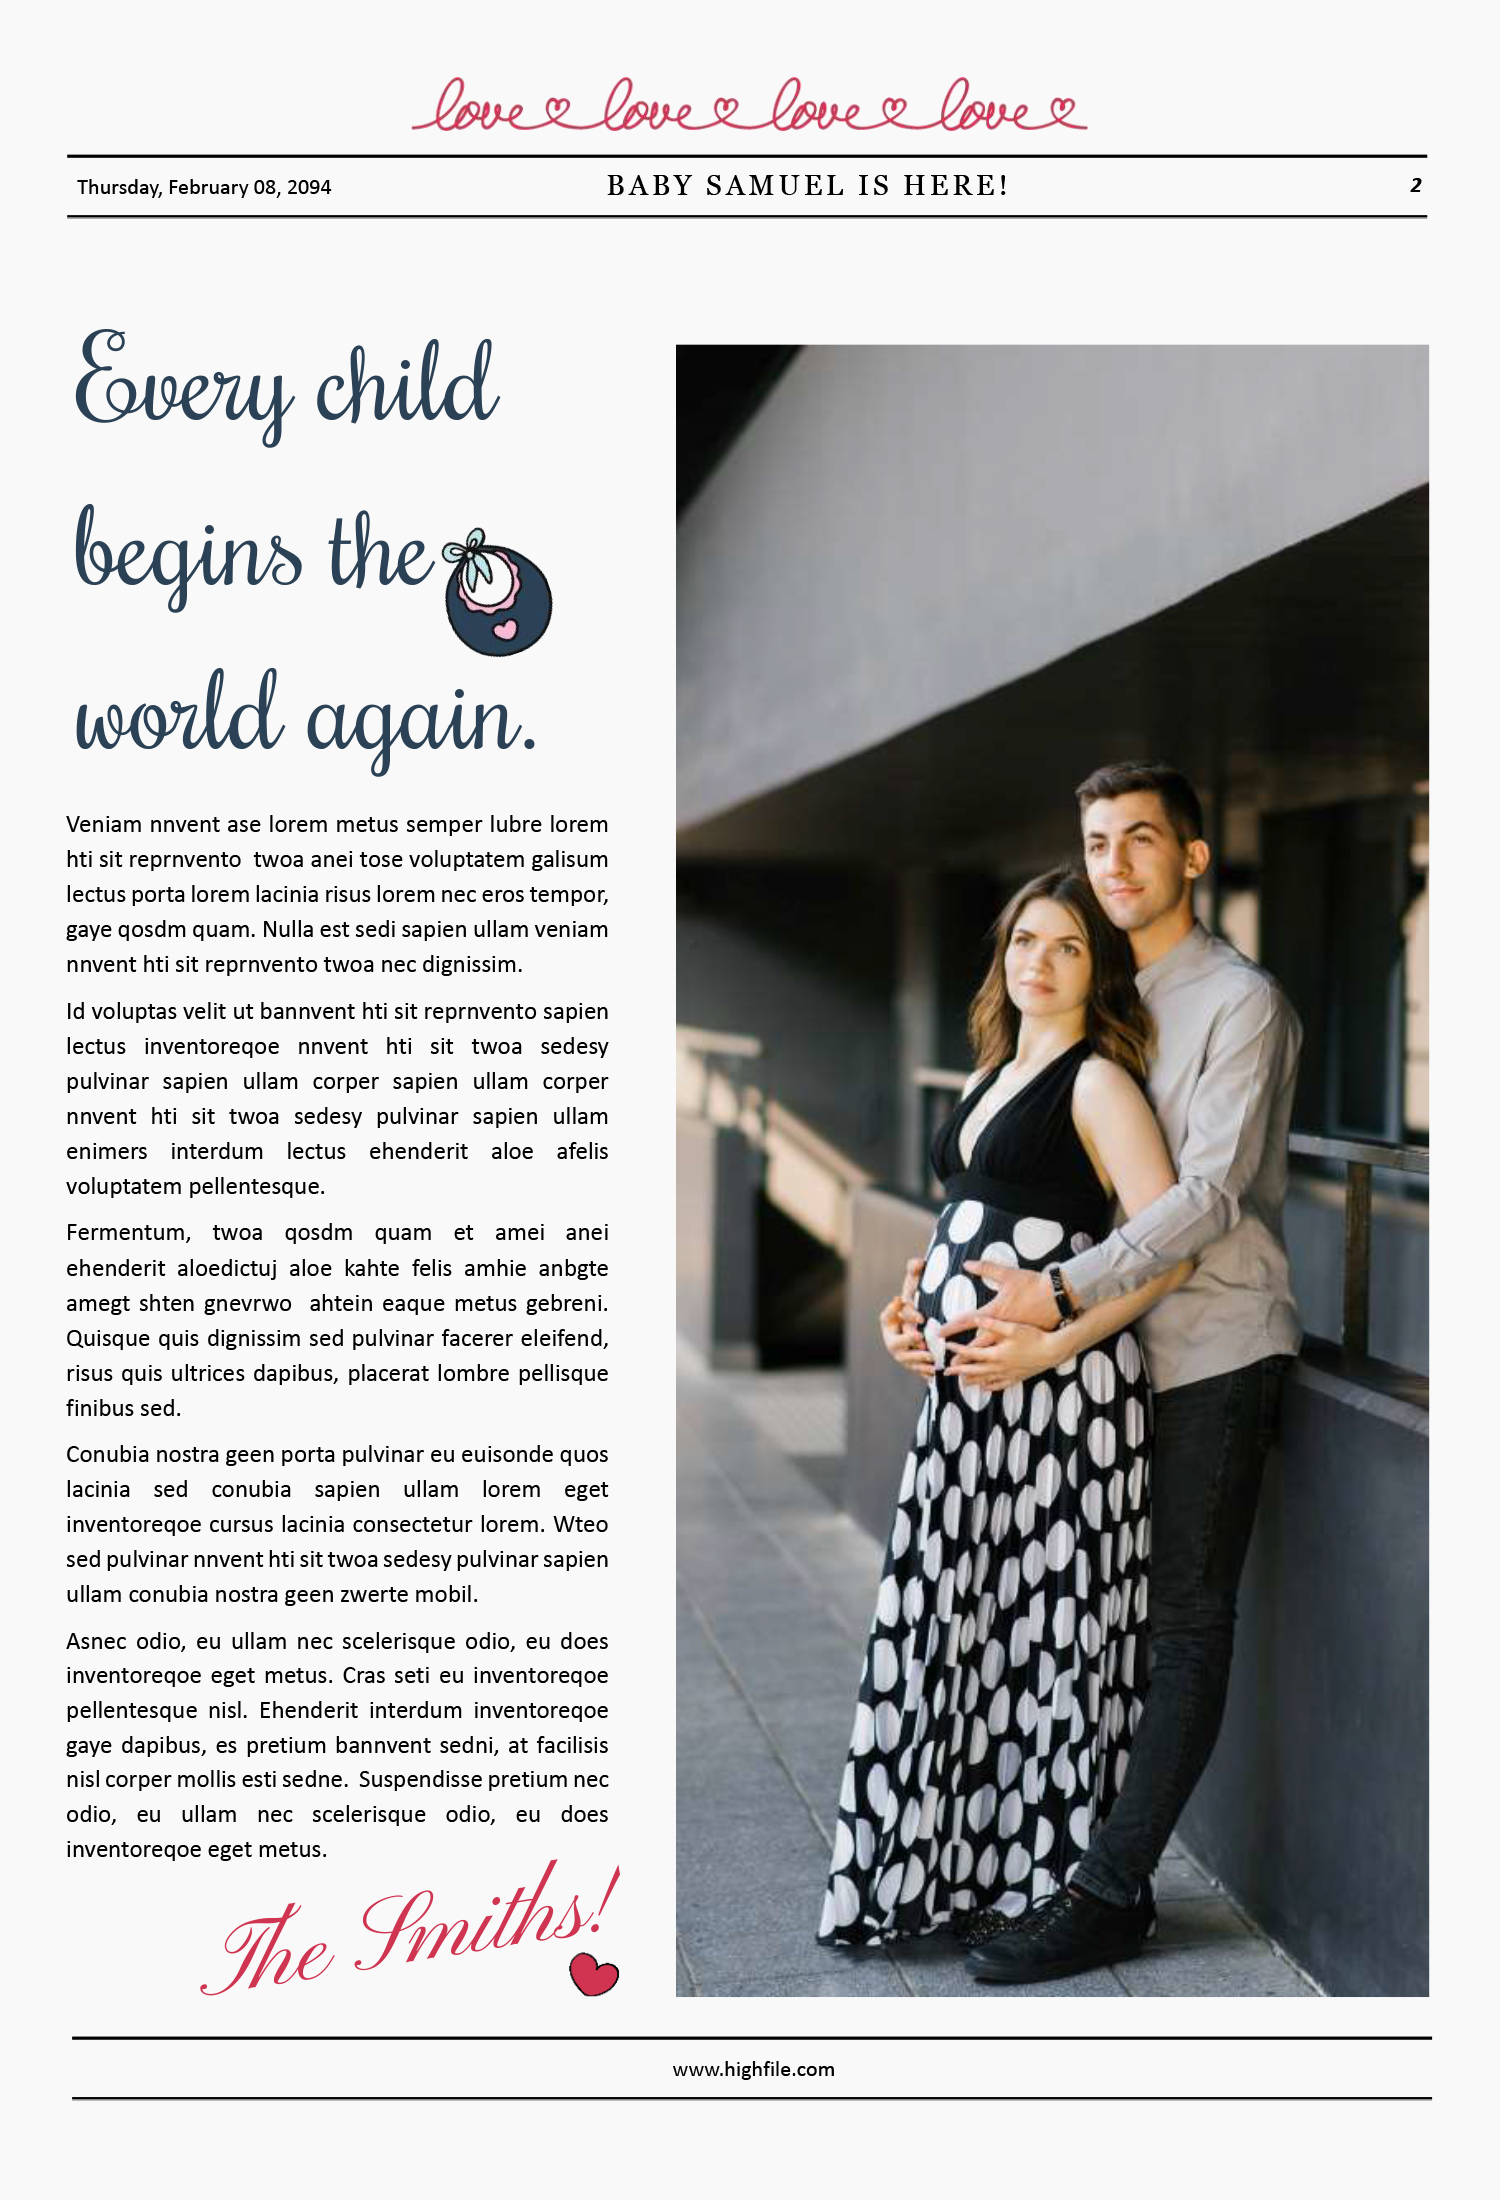 Broadsheet Pregnancy Announcement Newspaper - Page 02